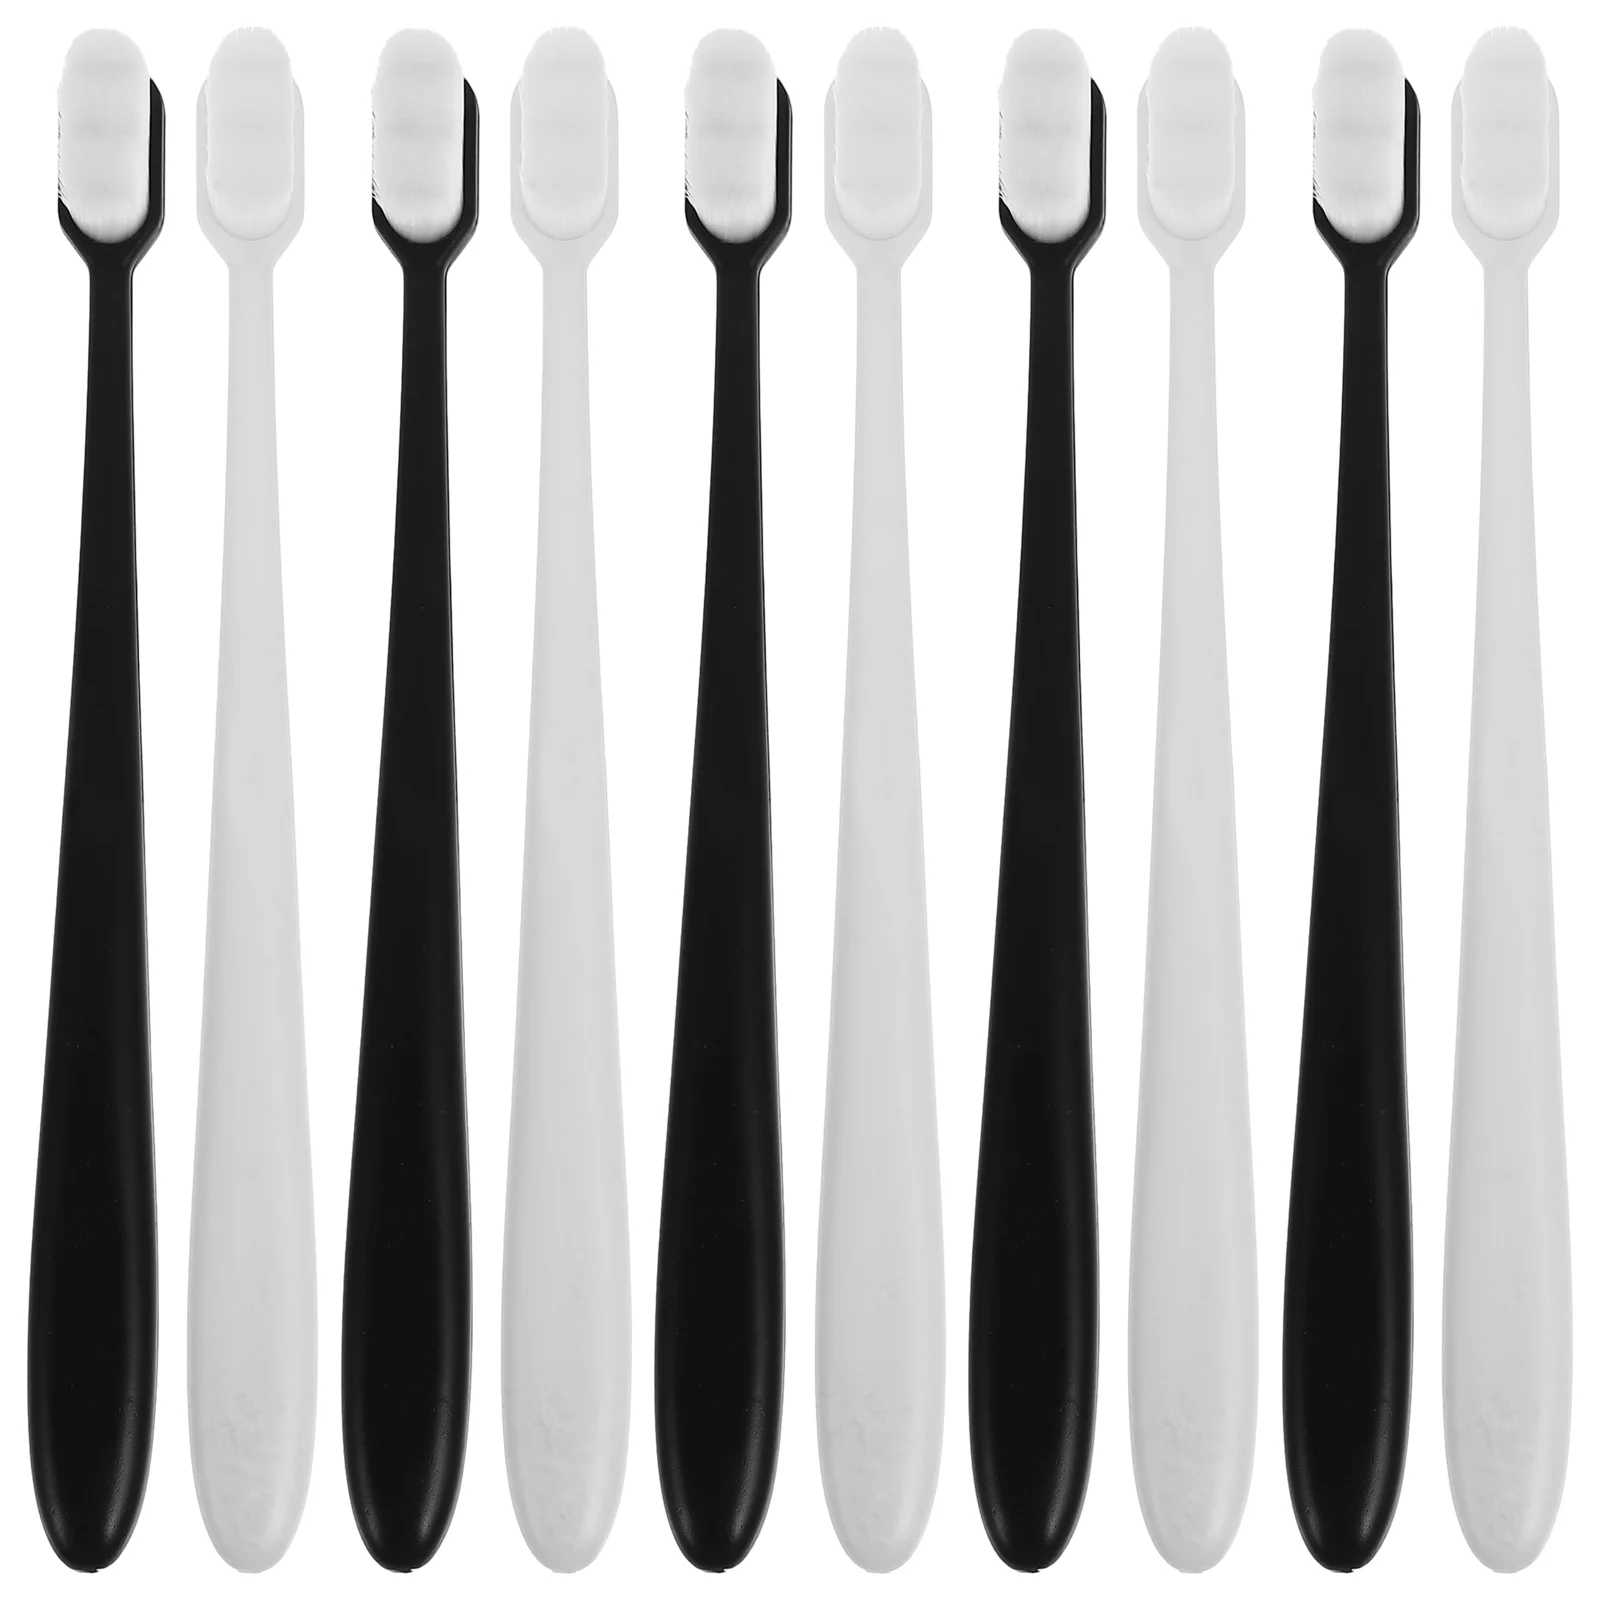 

10 Pcs Teeth Supply Hand Tools Portable Convenient Toothbrushes Cleaner Fiber Abs Woman Miss